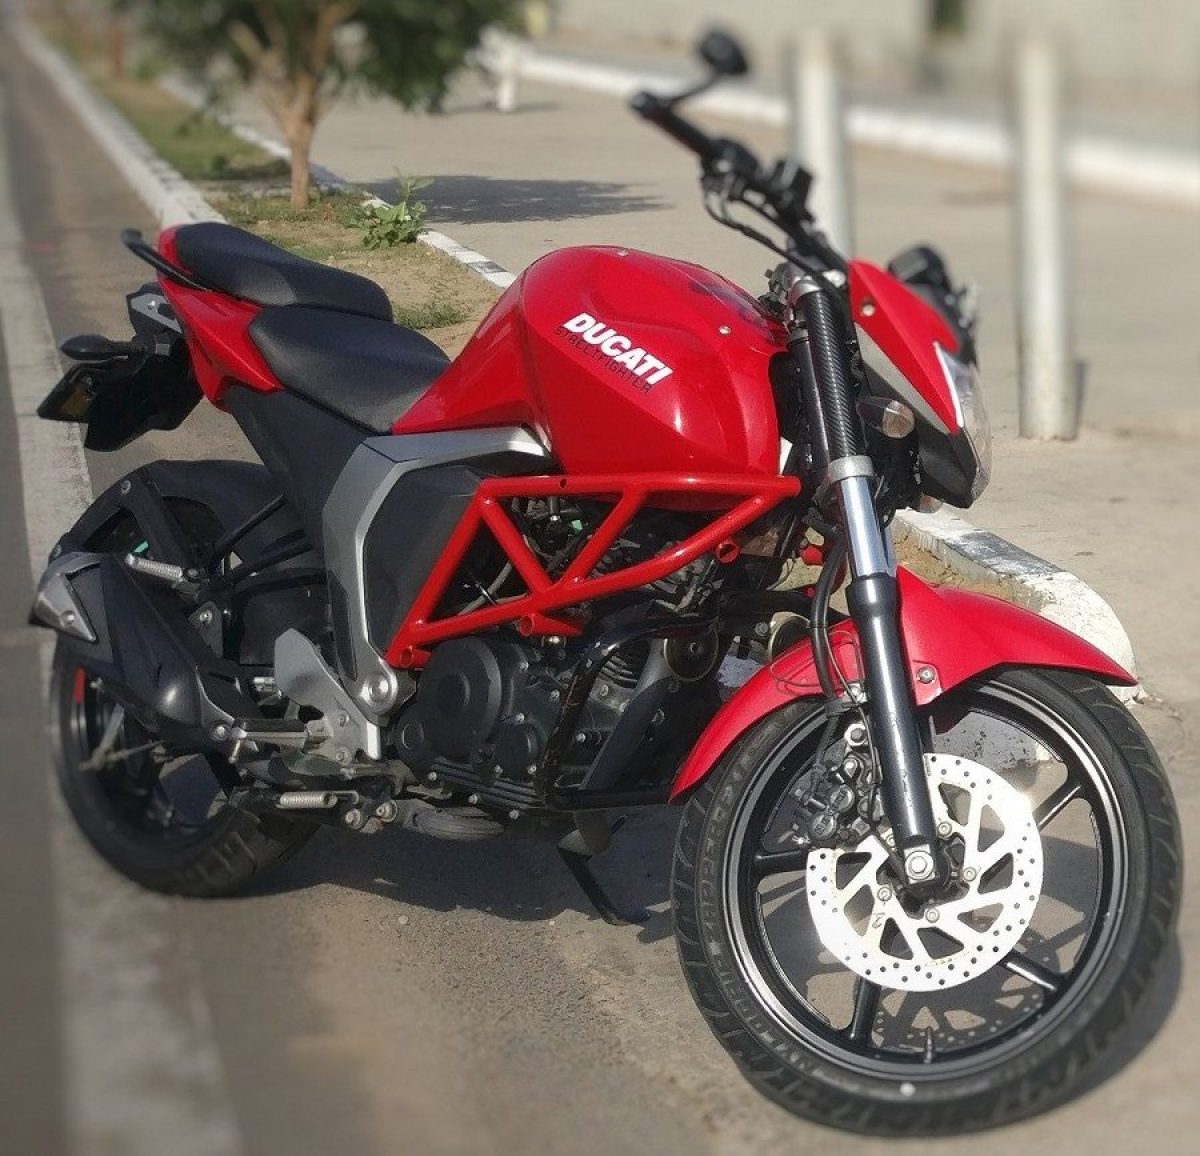 This Yamaha Fz S Is Modified Into A Ducati Monster Look Alike